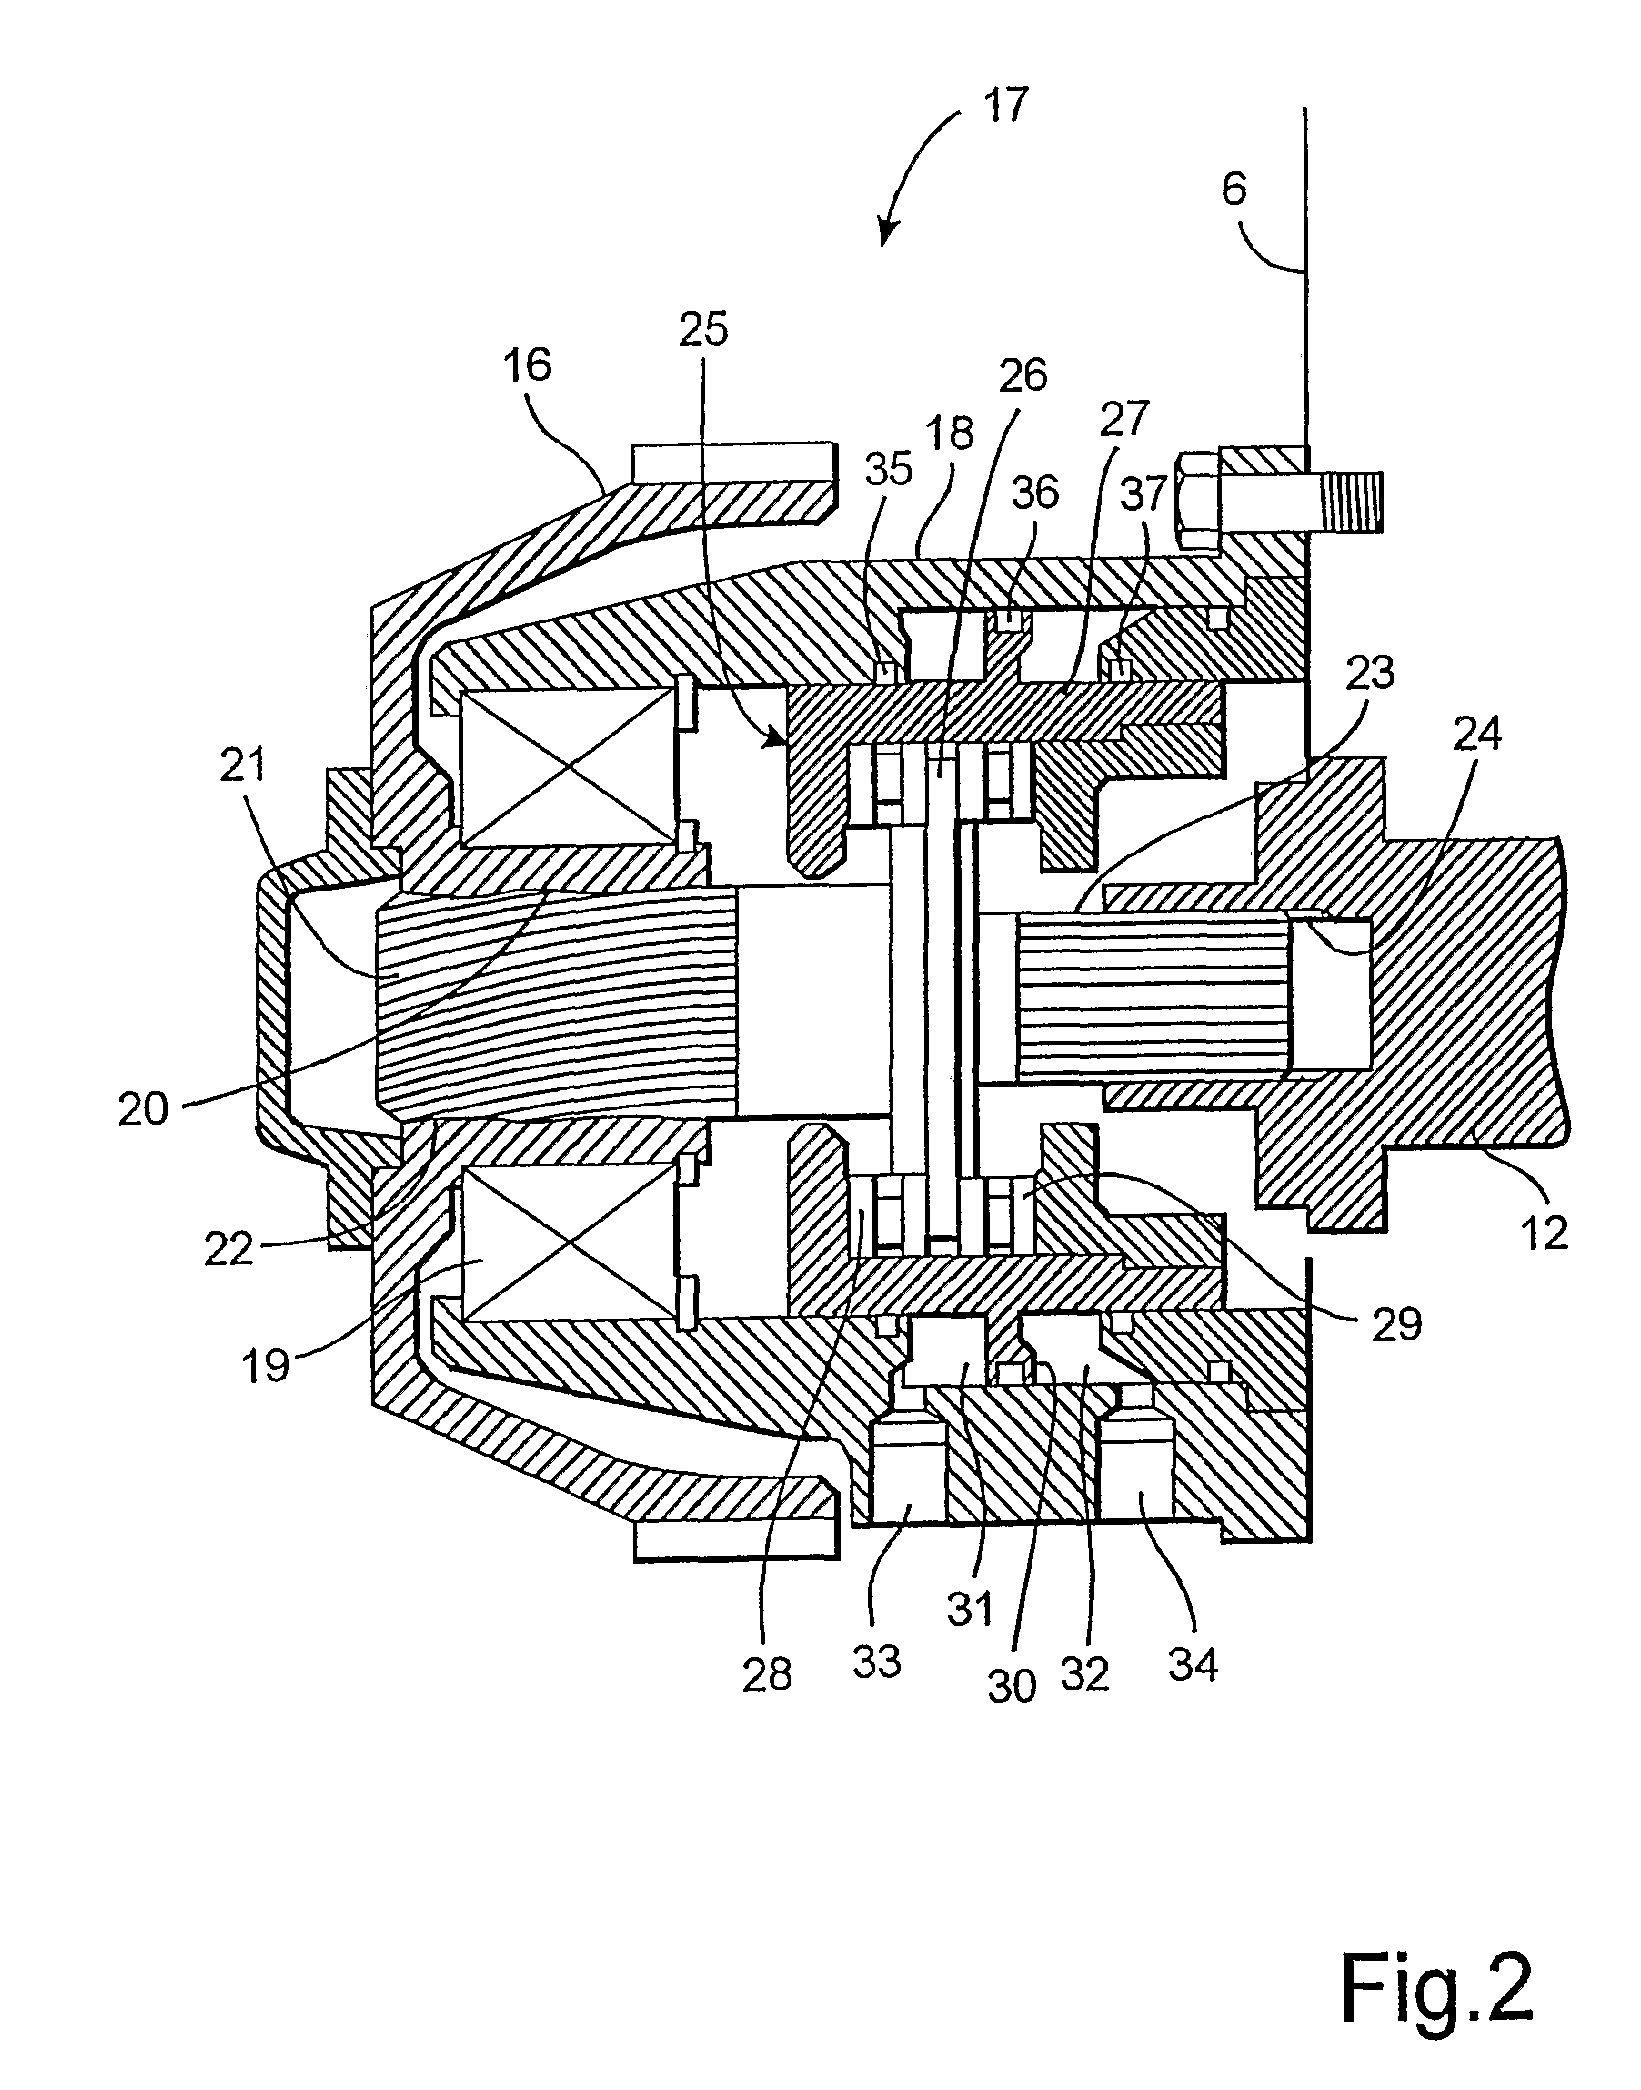 Device for controlling the phase angle between a first and a second crankshaft